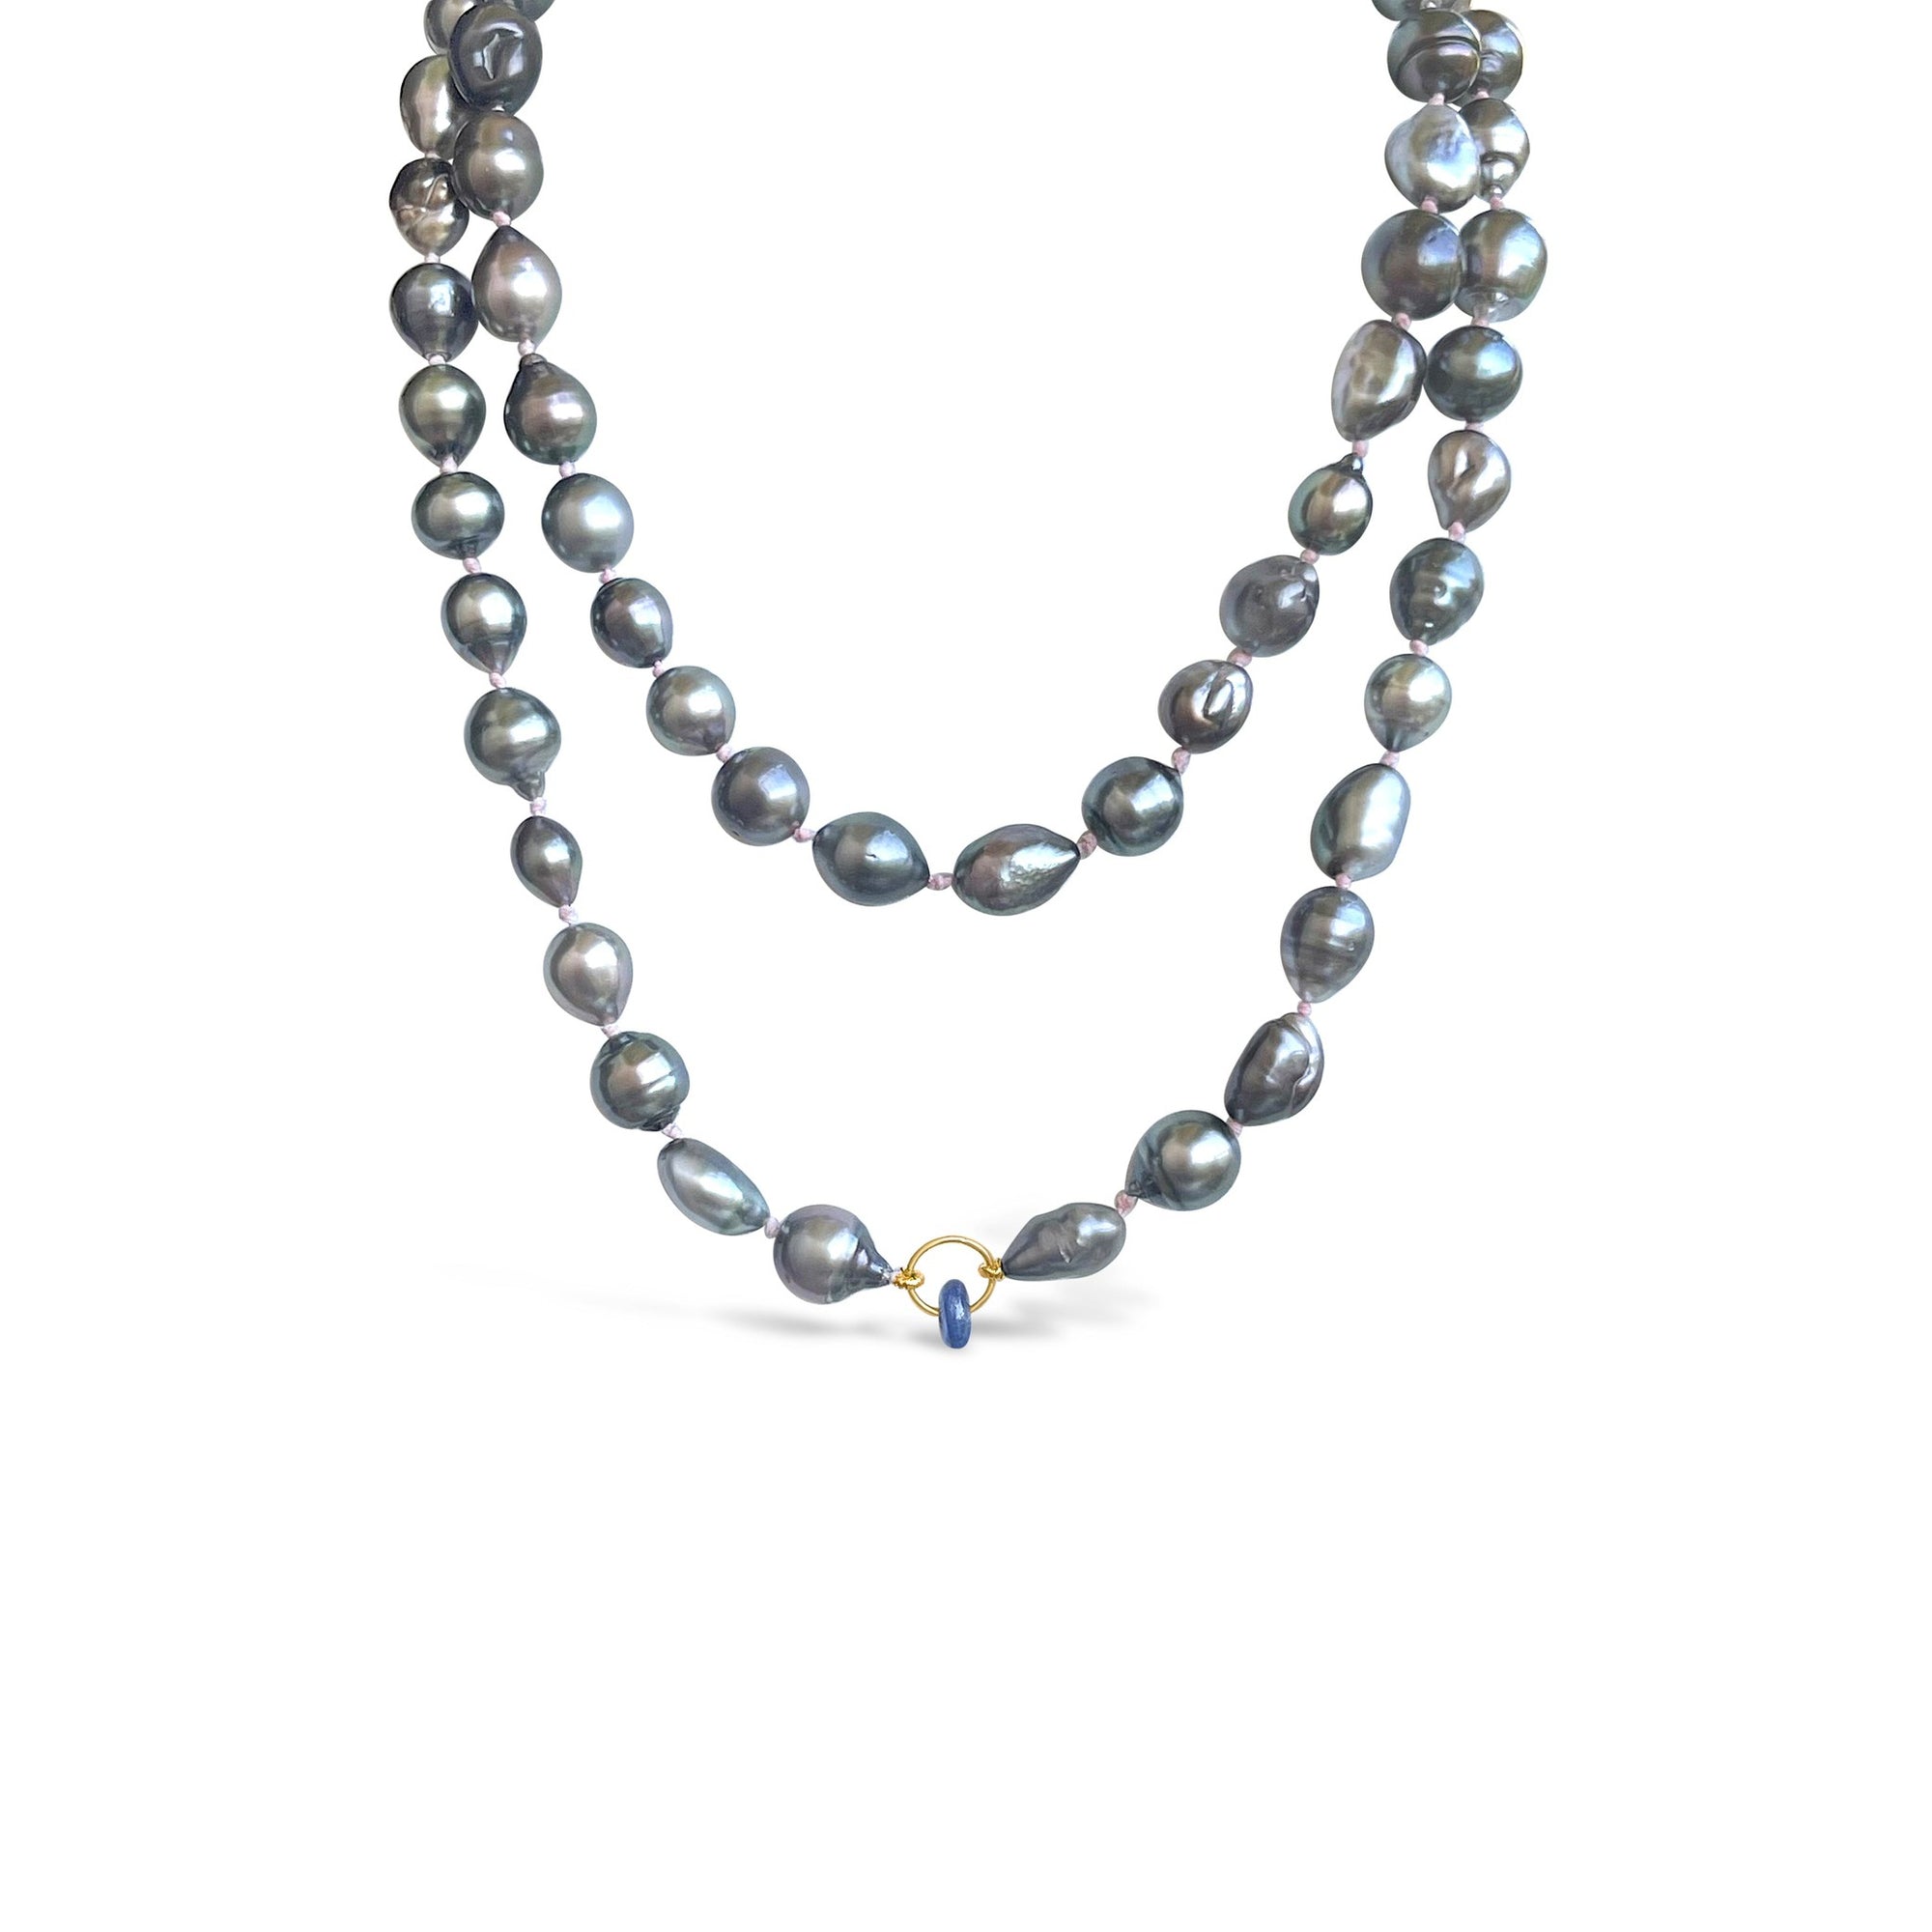 Astrological Gem Tahitian Pearl Necklace for The Moon